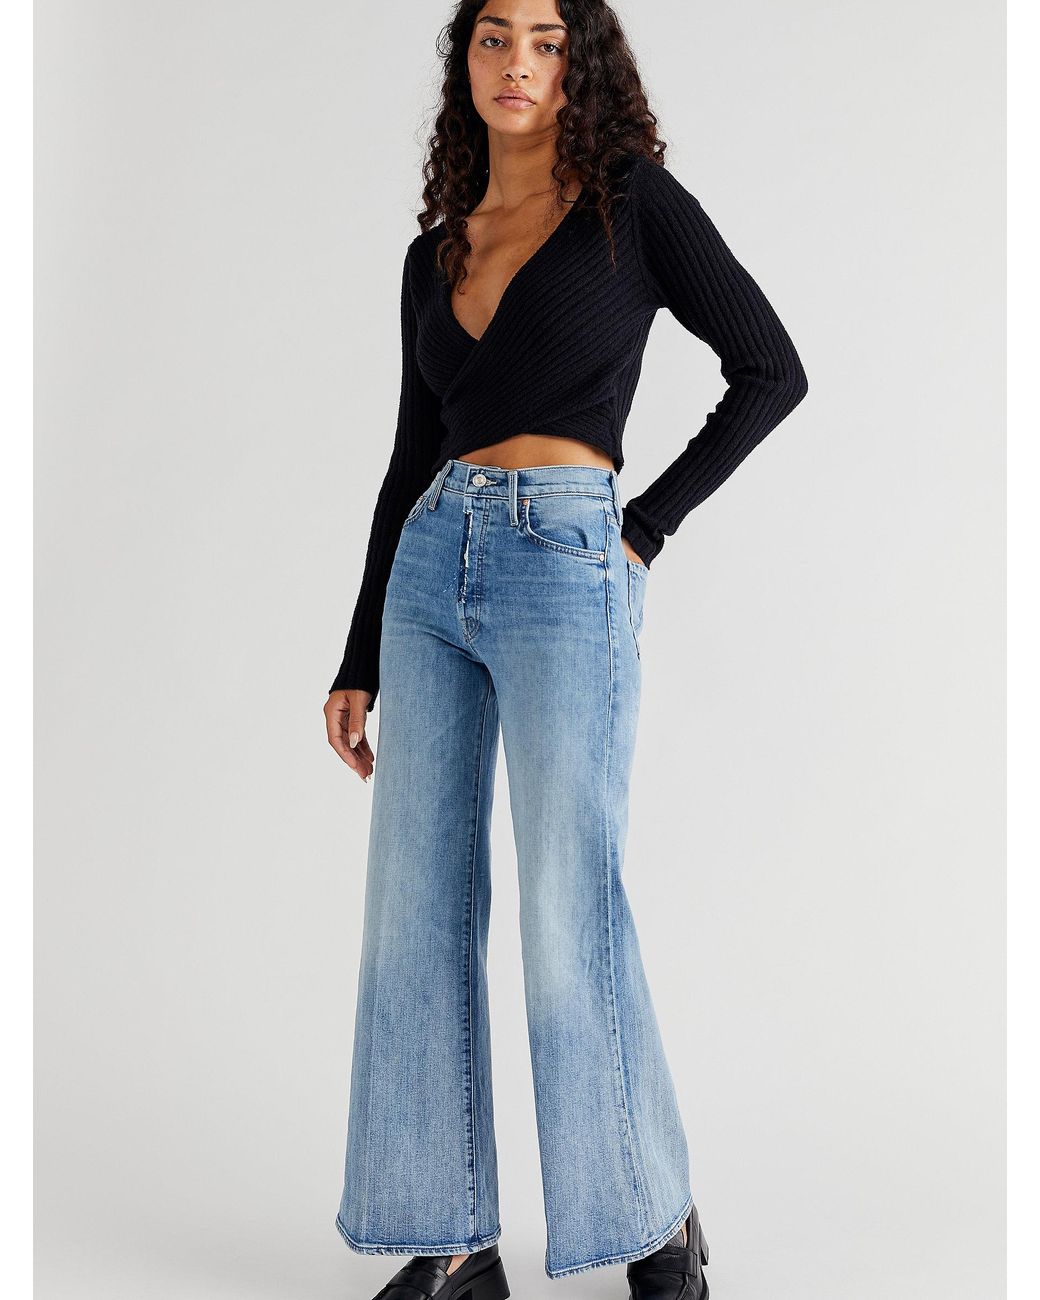 Free People Denim Mother The Fly Cut Tomcat Roller Jeans in Blue | Lyst